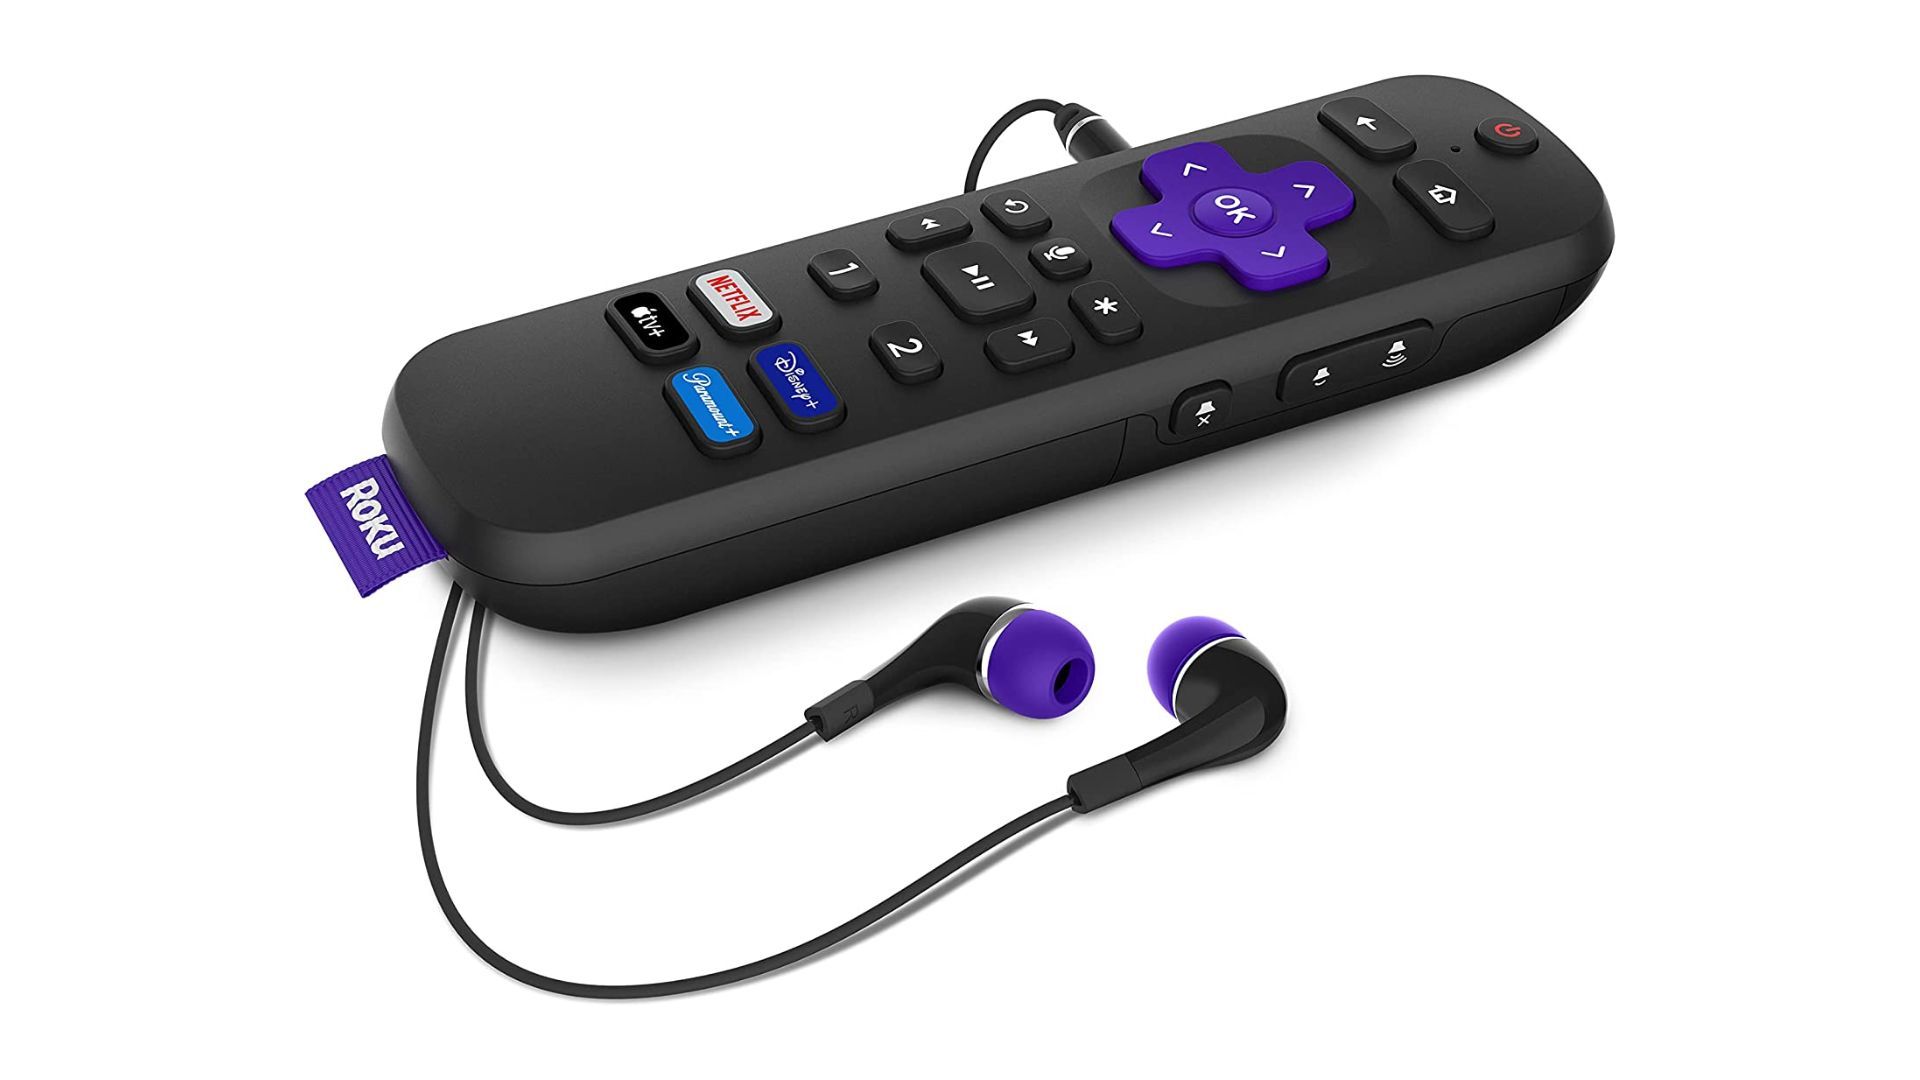 Roku Streambar Pro remote control and earbuds